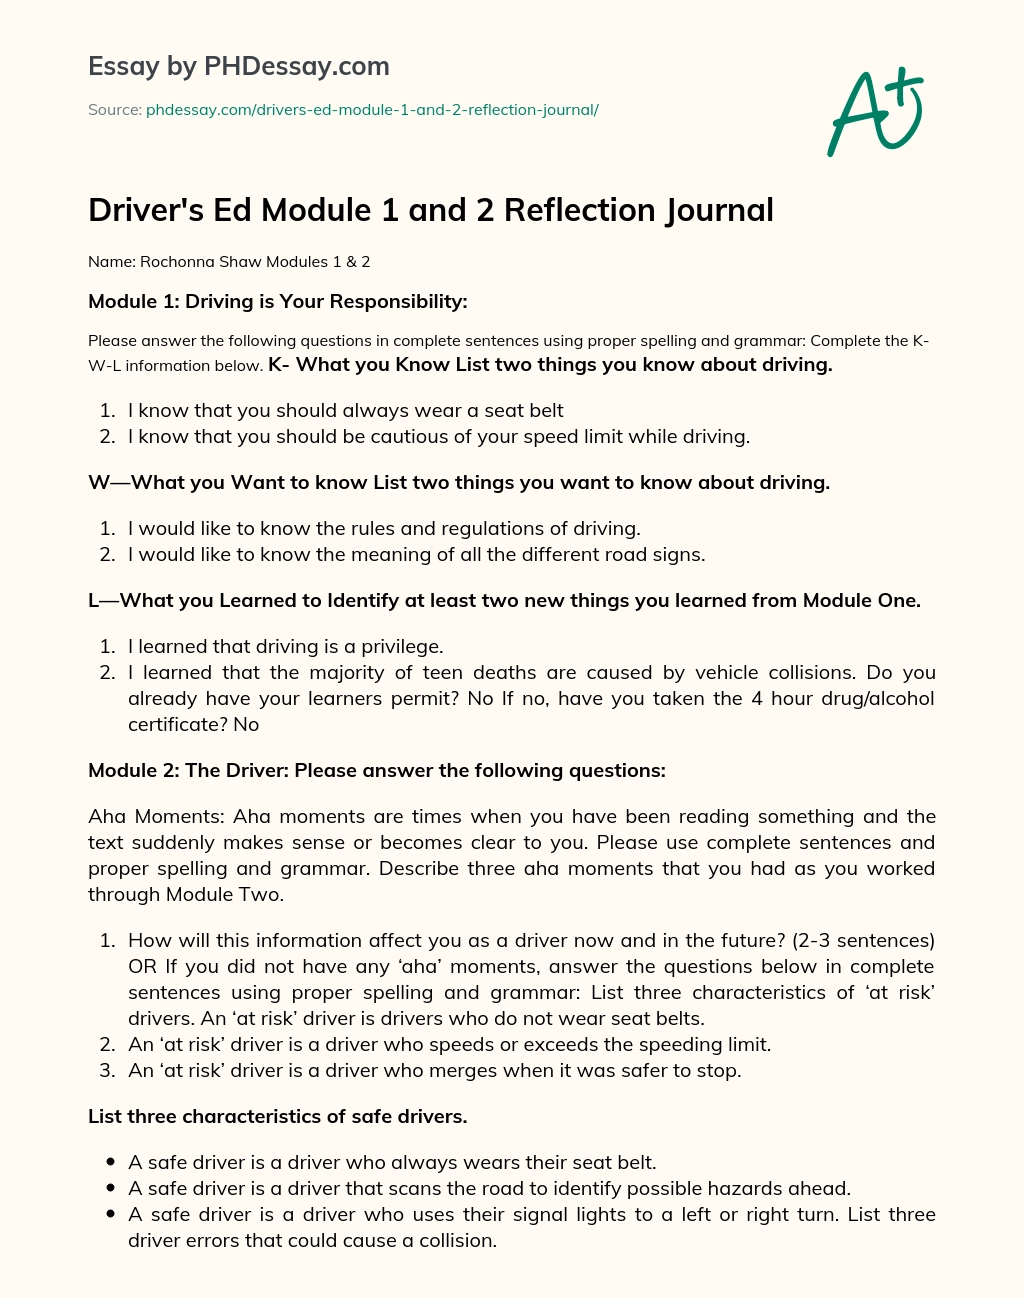 Driver’s Ed Module 1 and 2 Reflection Journal essay